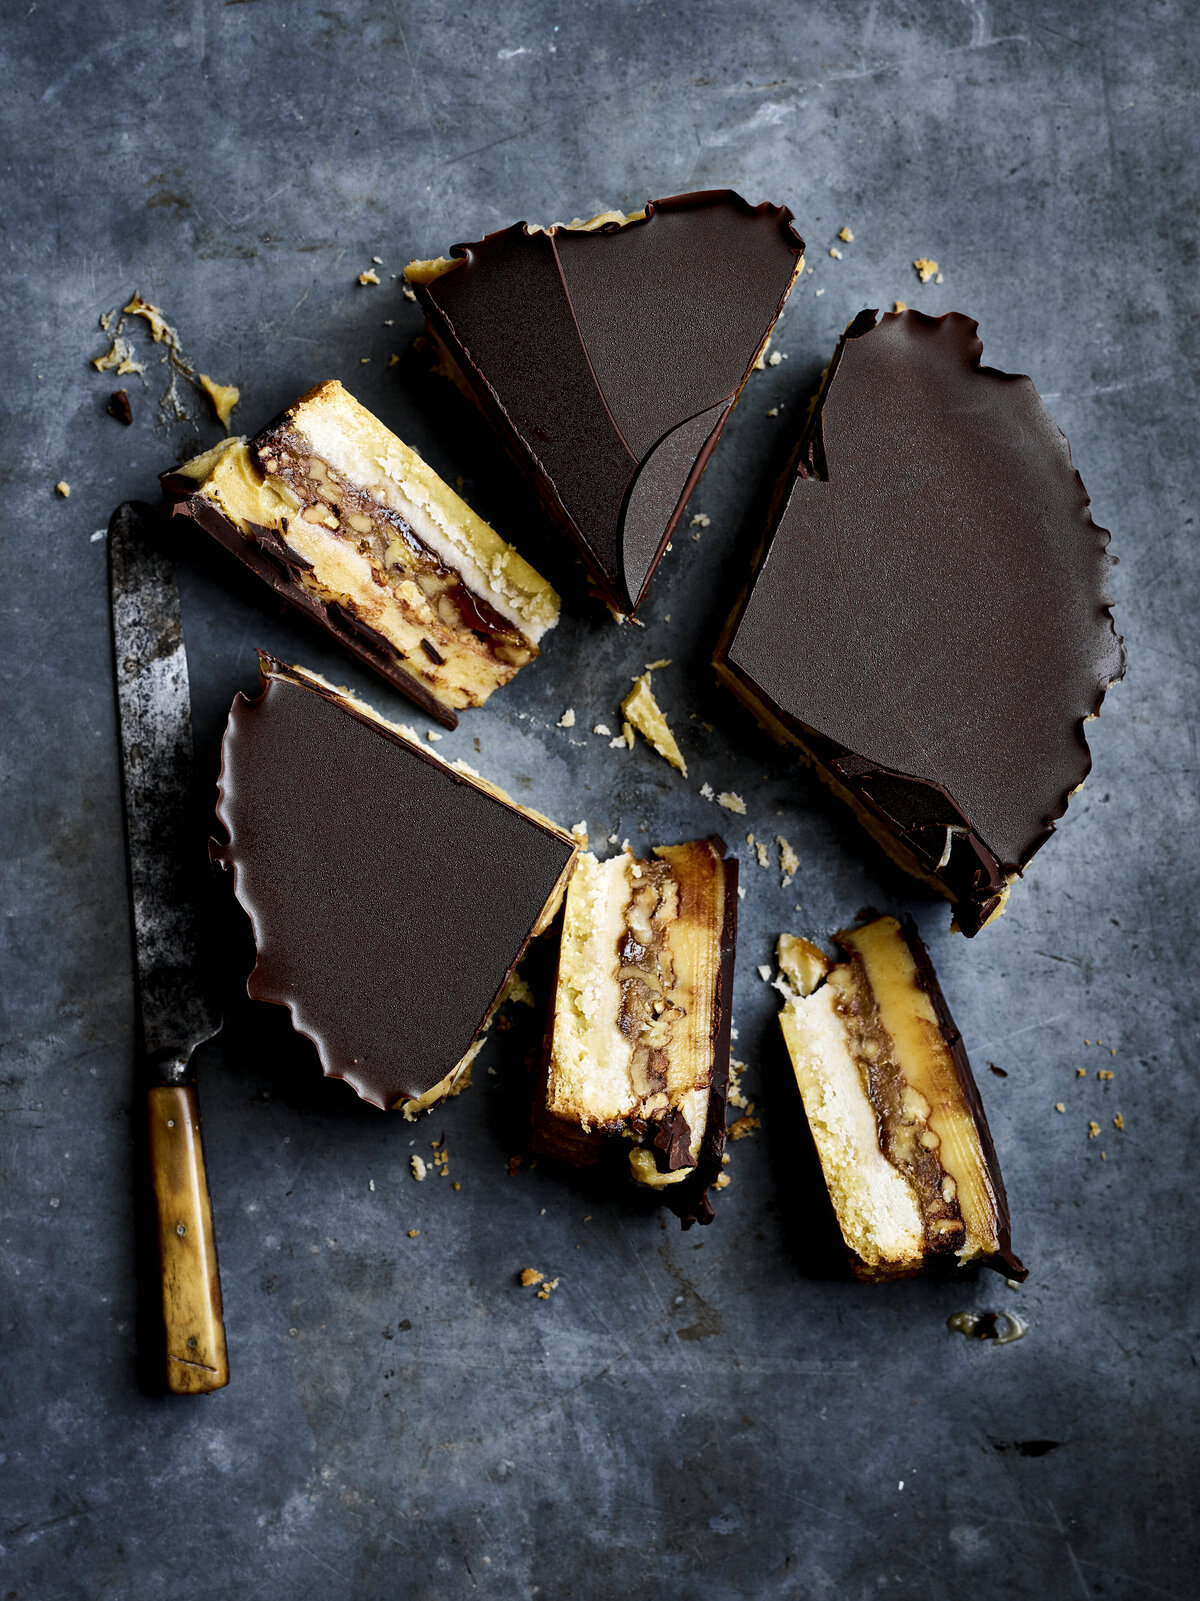 Millionaire shortbread tart with a layer of cream, chocolate, salted caramel and dark chocolate.